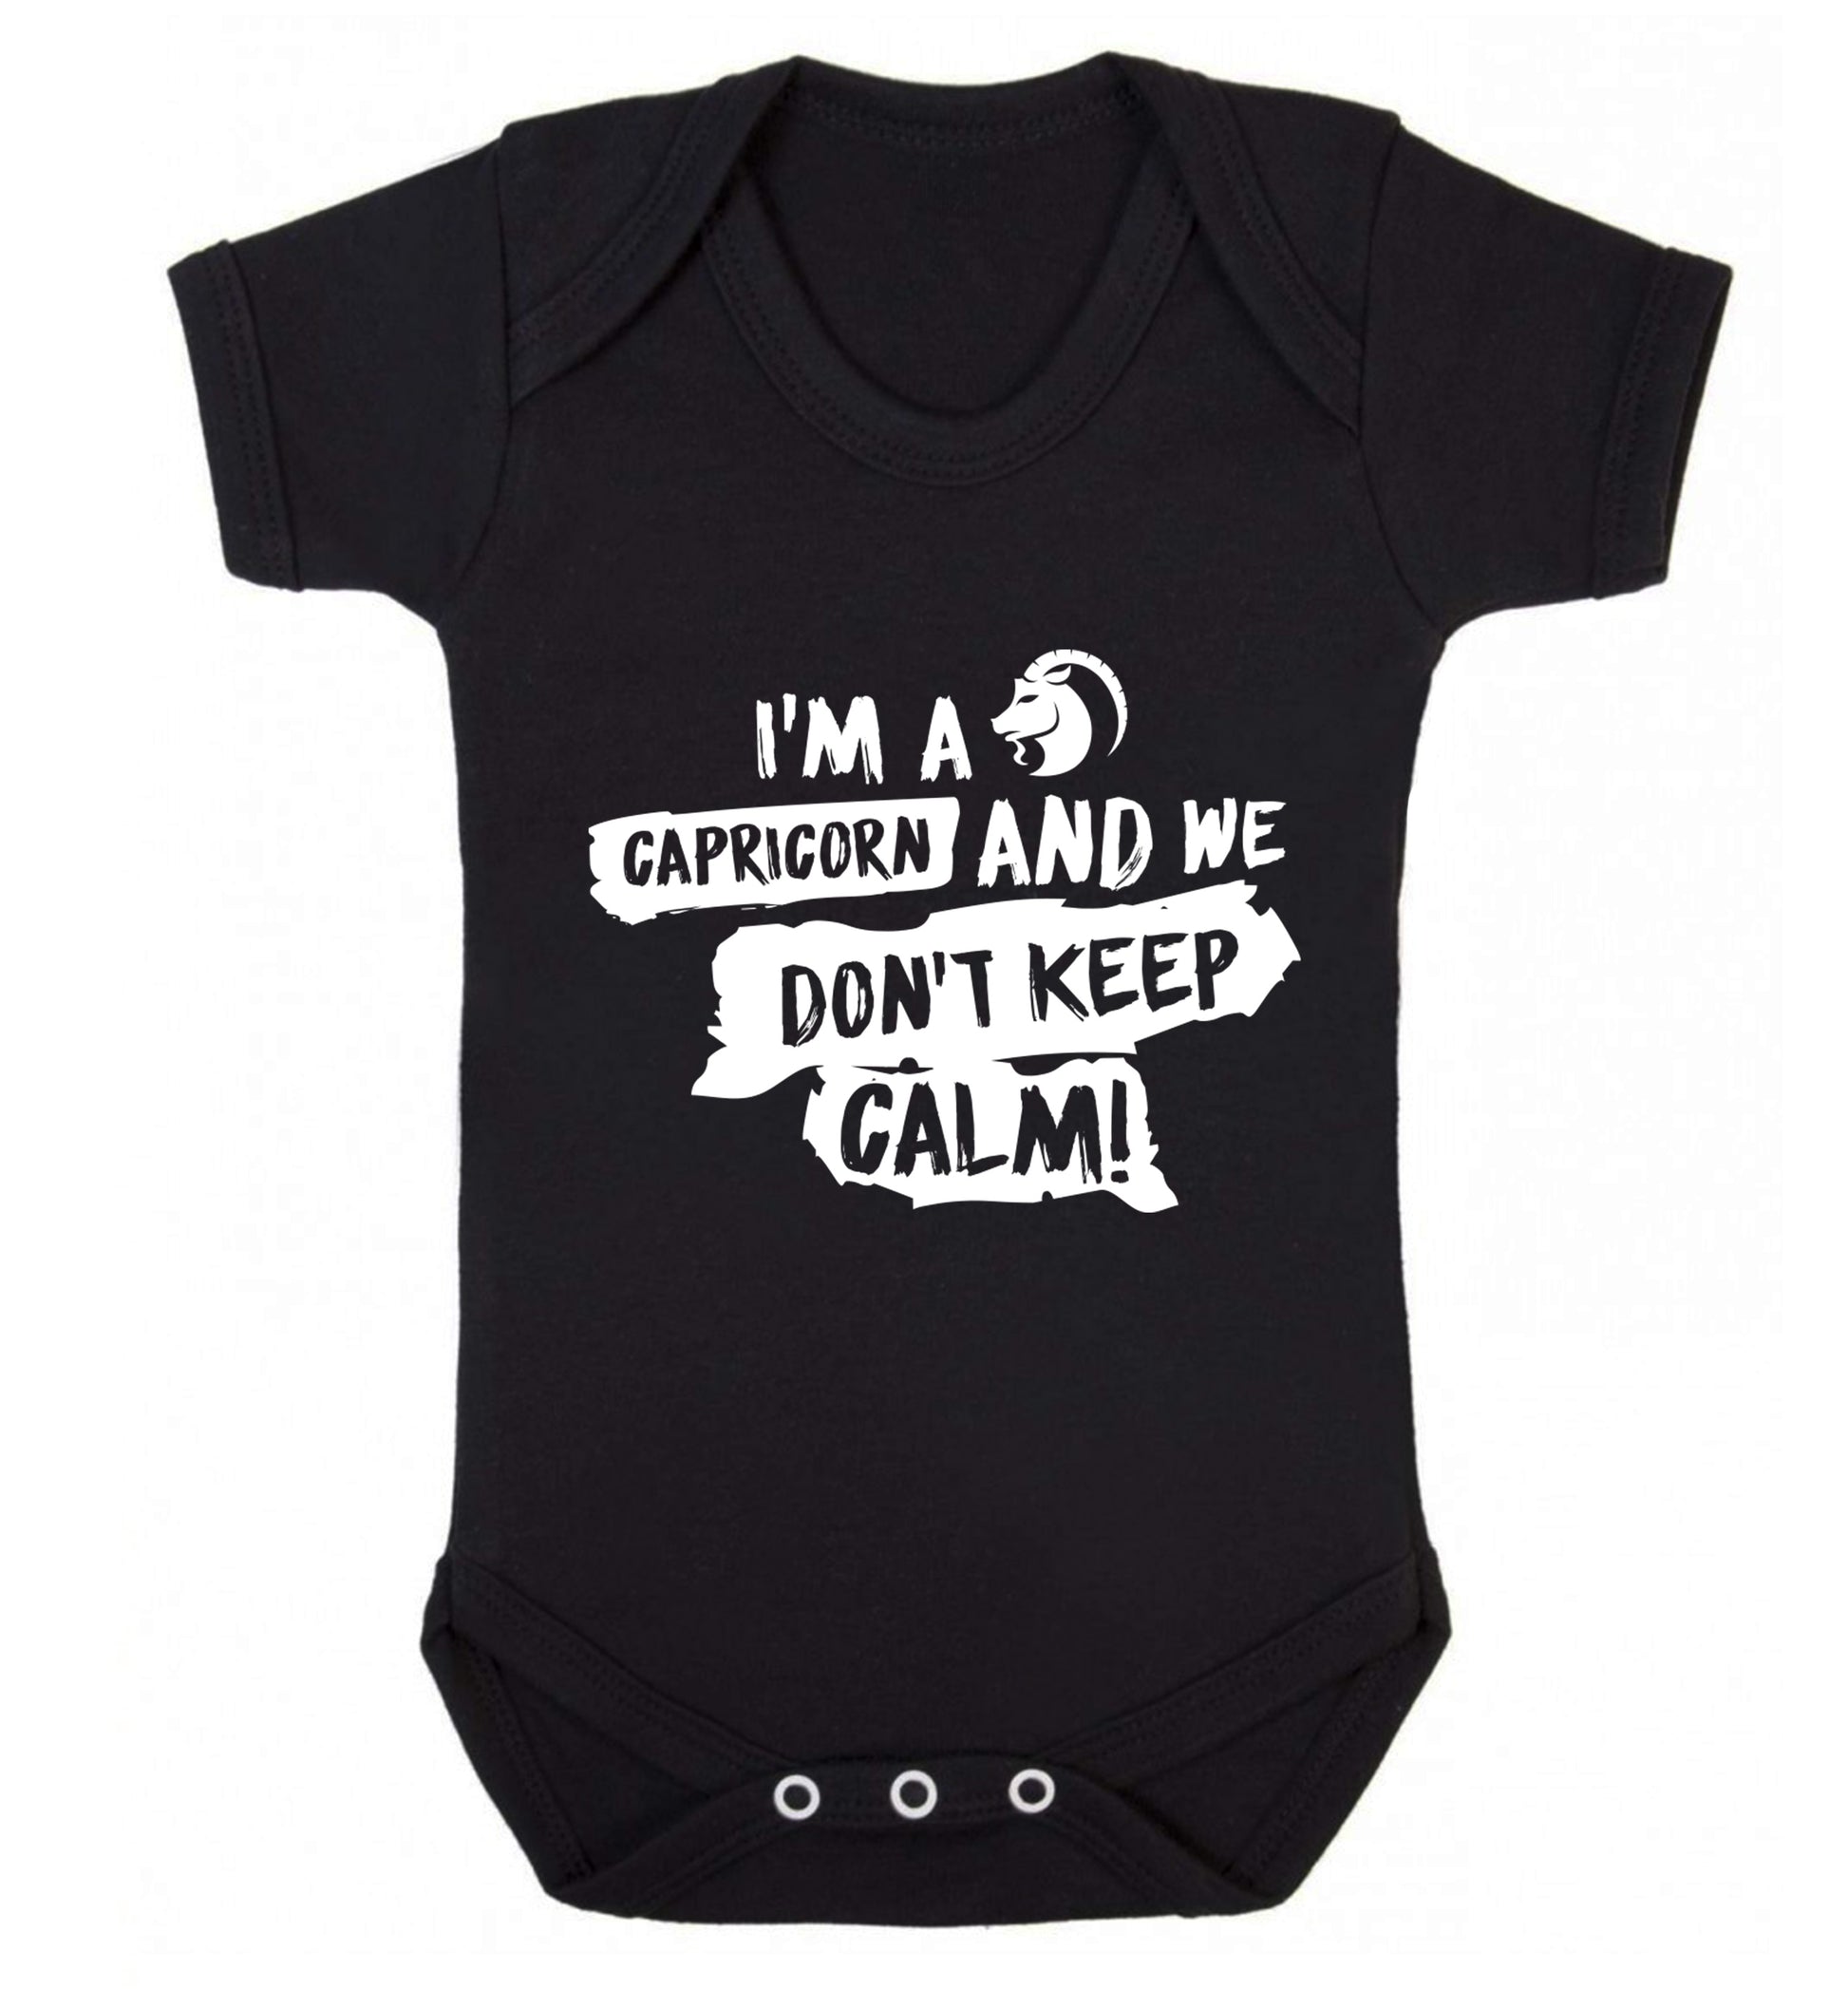 I'm a capricorn and we don't keep calm Baby Vest black 18-24 months